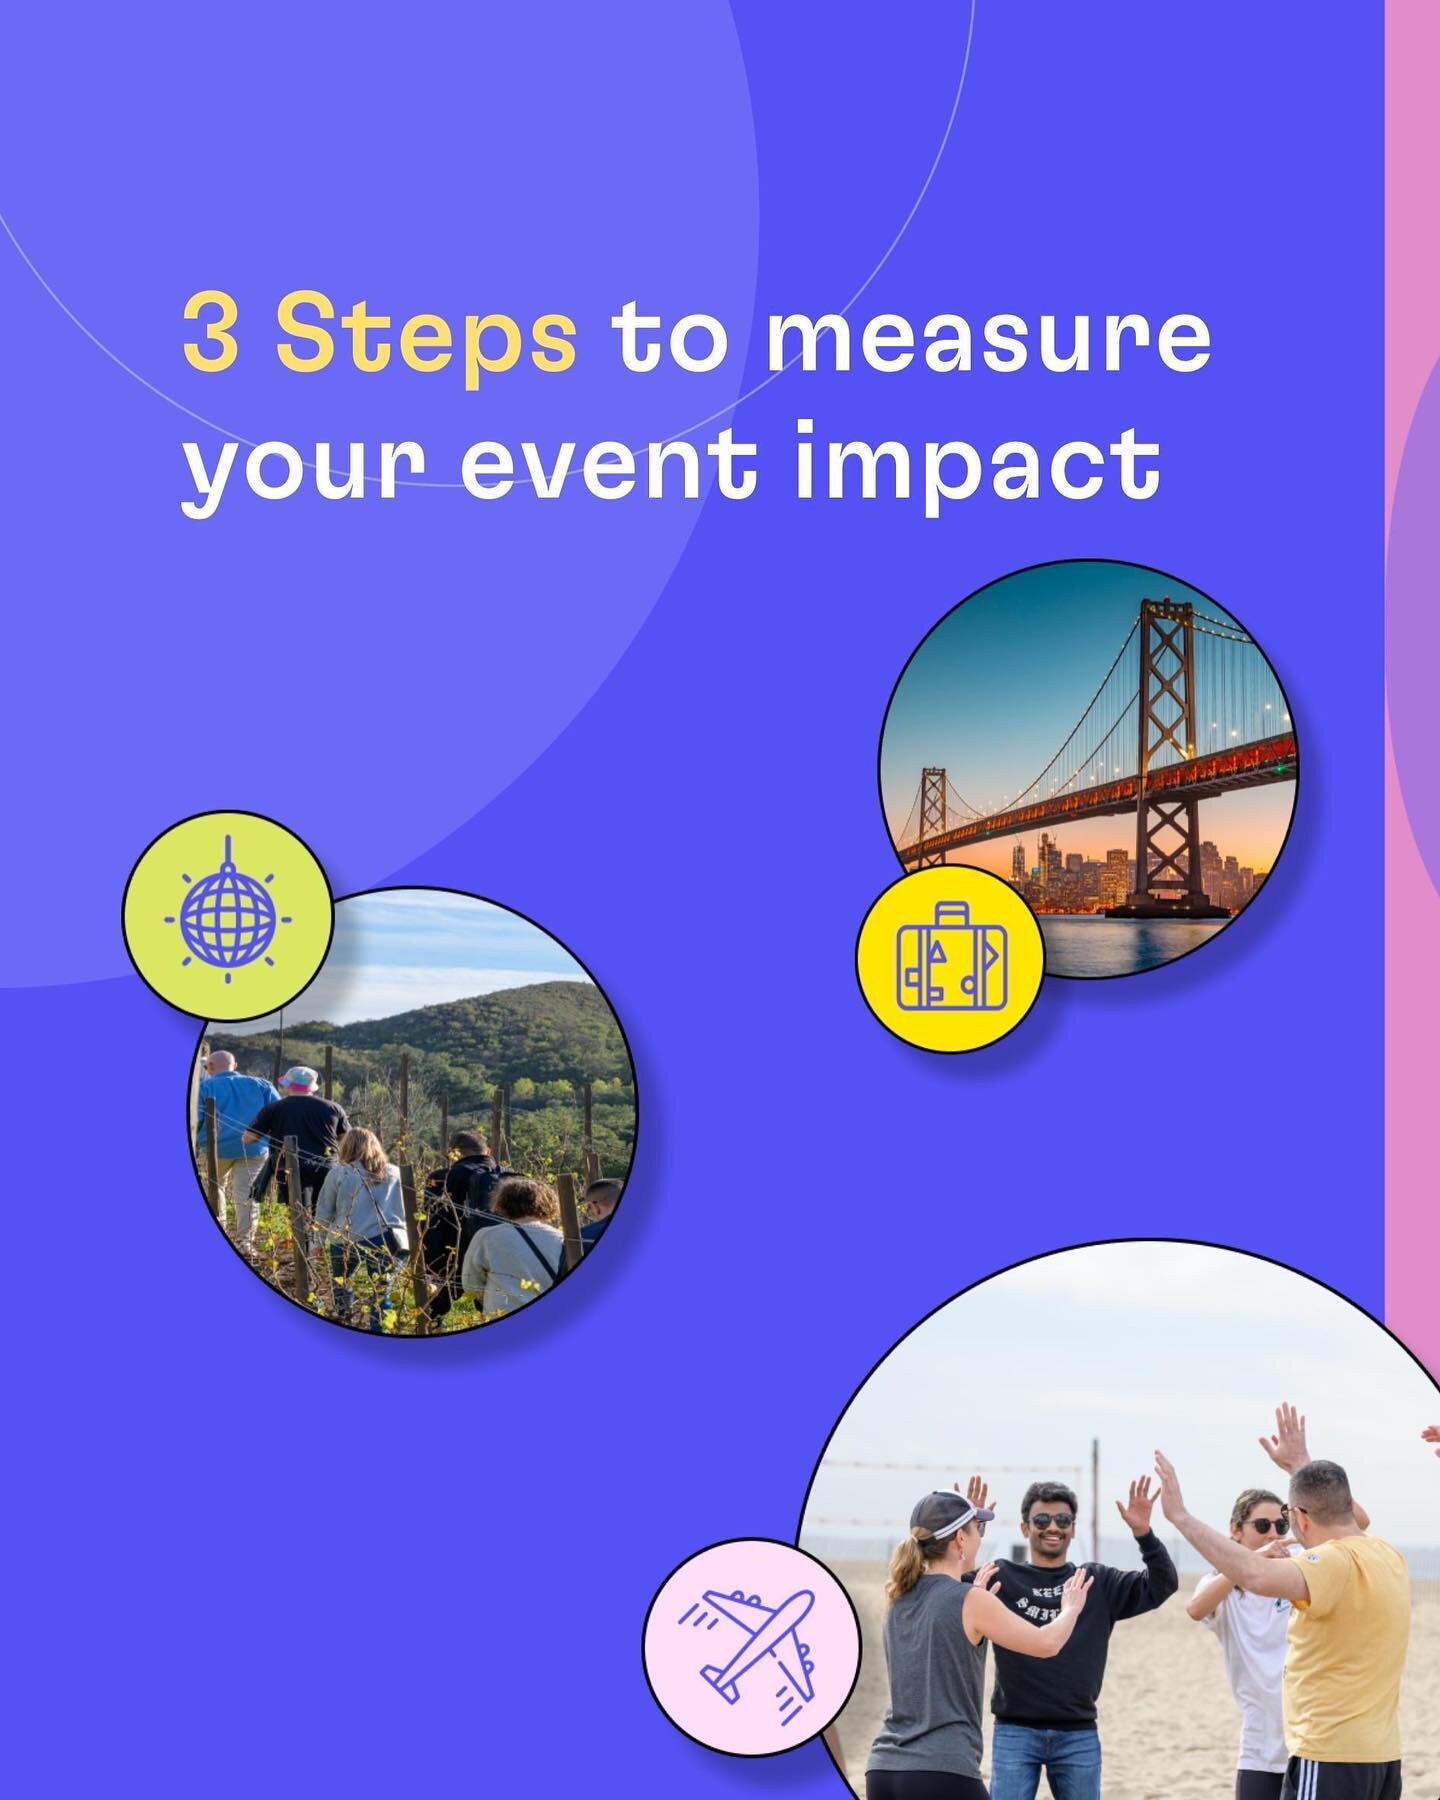 How do you know if your company event was successful? 🤔

Follow these 3 steps to gain insight into what worked well and what needs improvement.